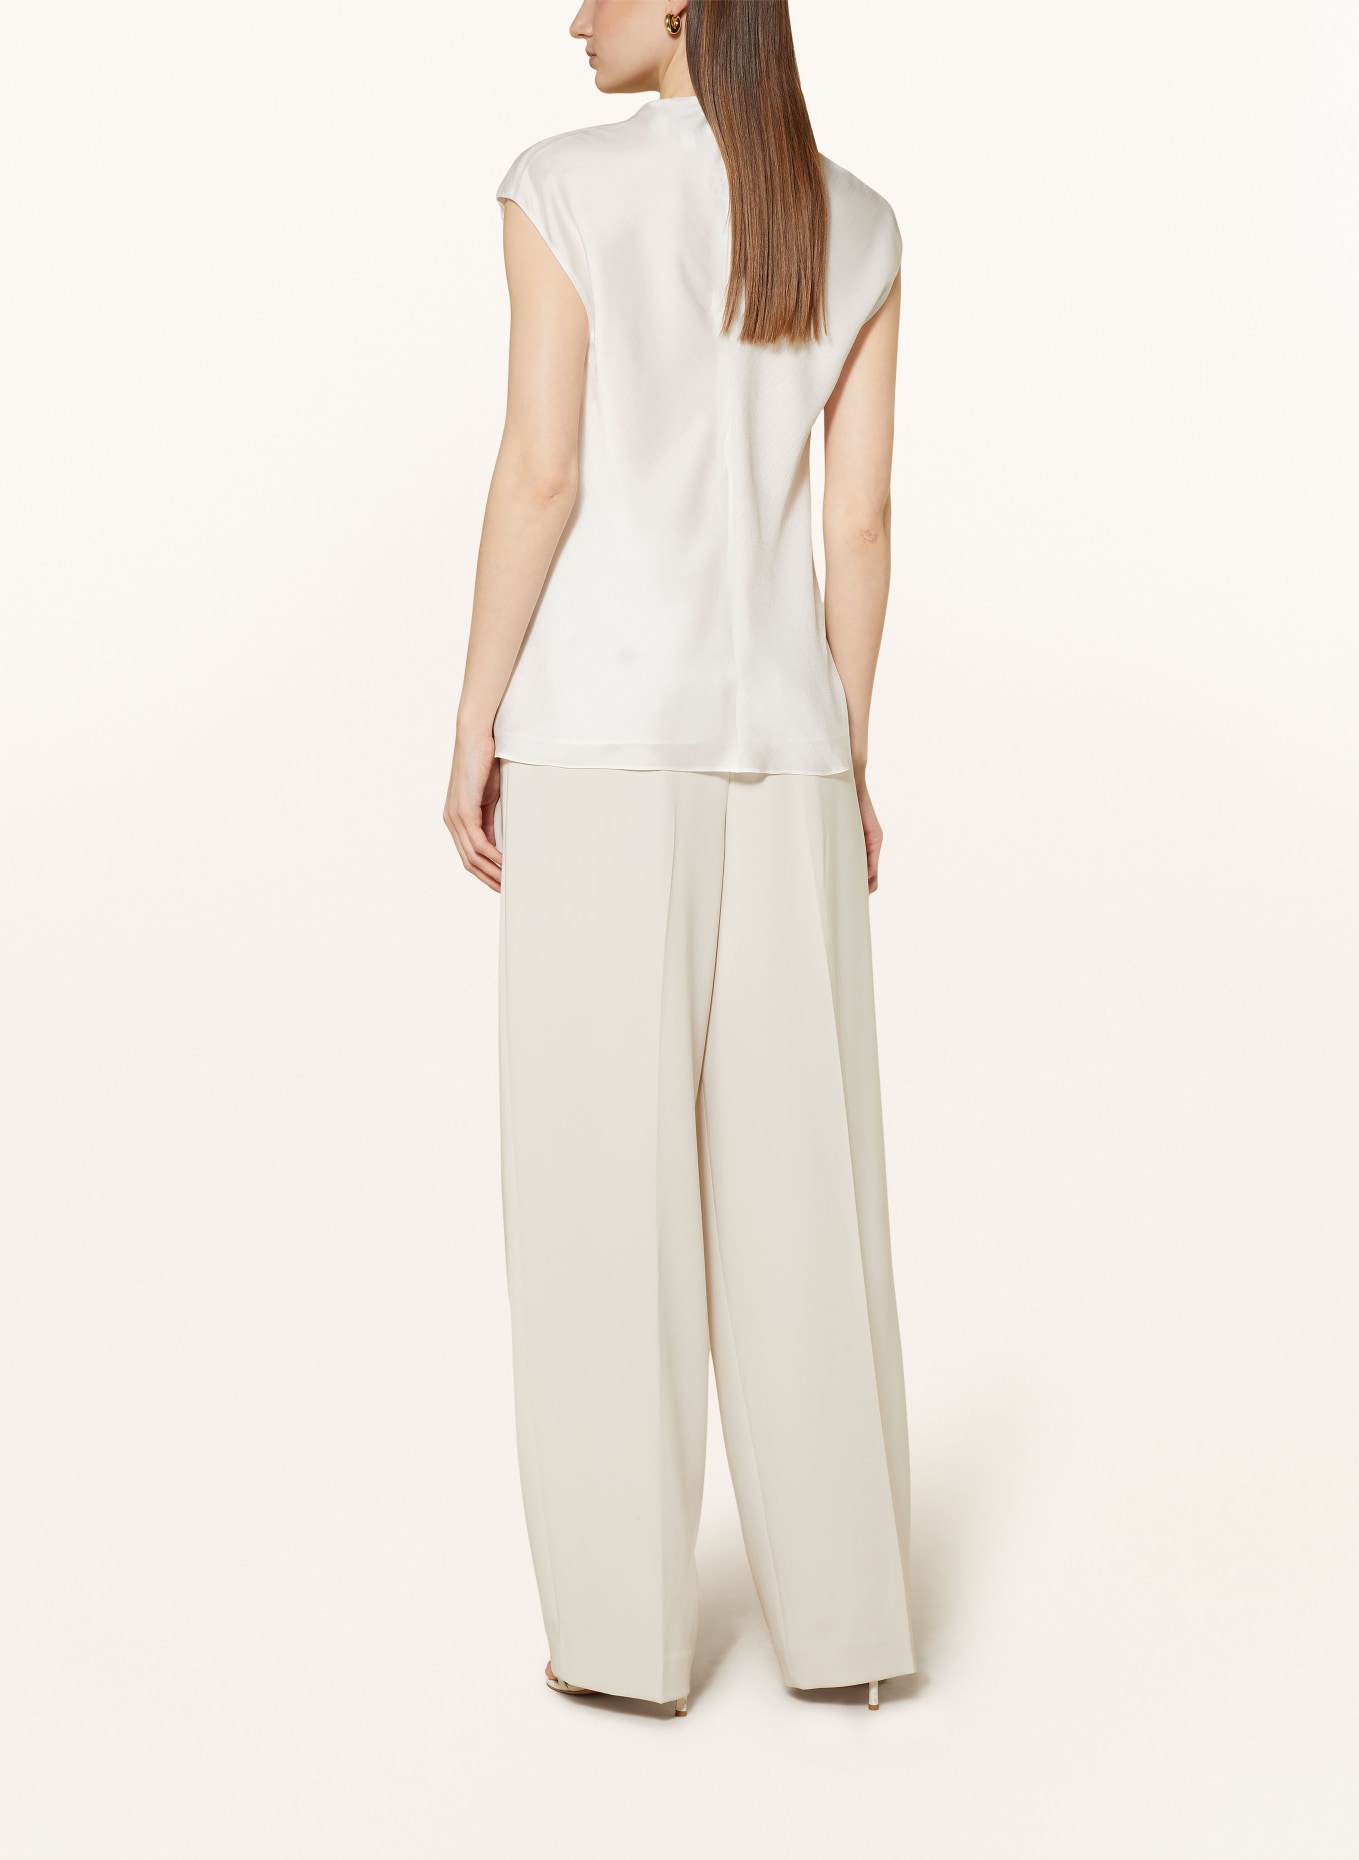 TED BAKER Blouse top MISRINA, Color: WHITE (Image 3)